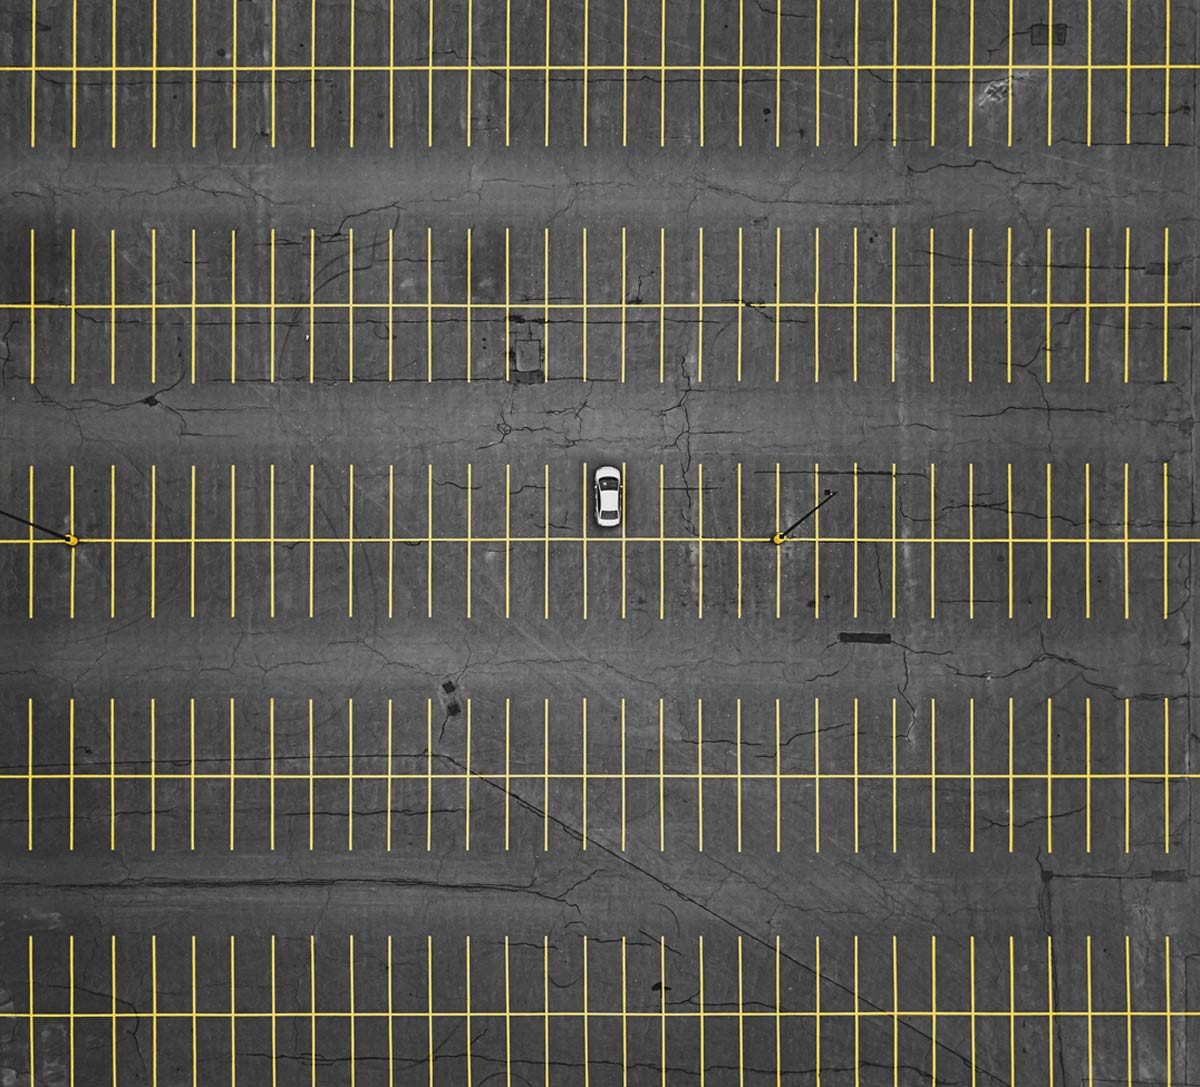 How Do You Paint Parking Lot Lines?